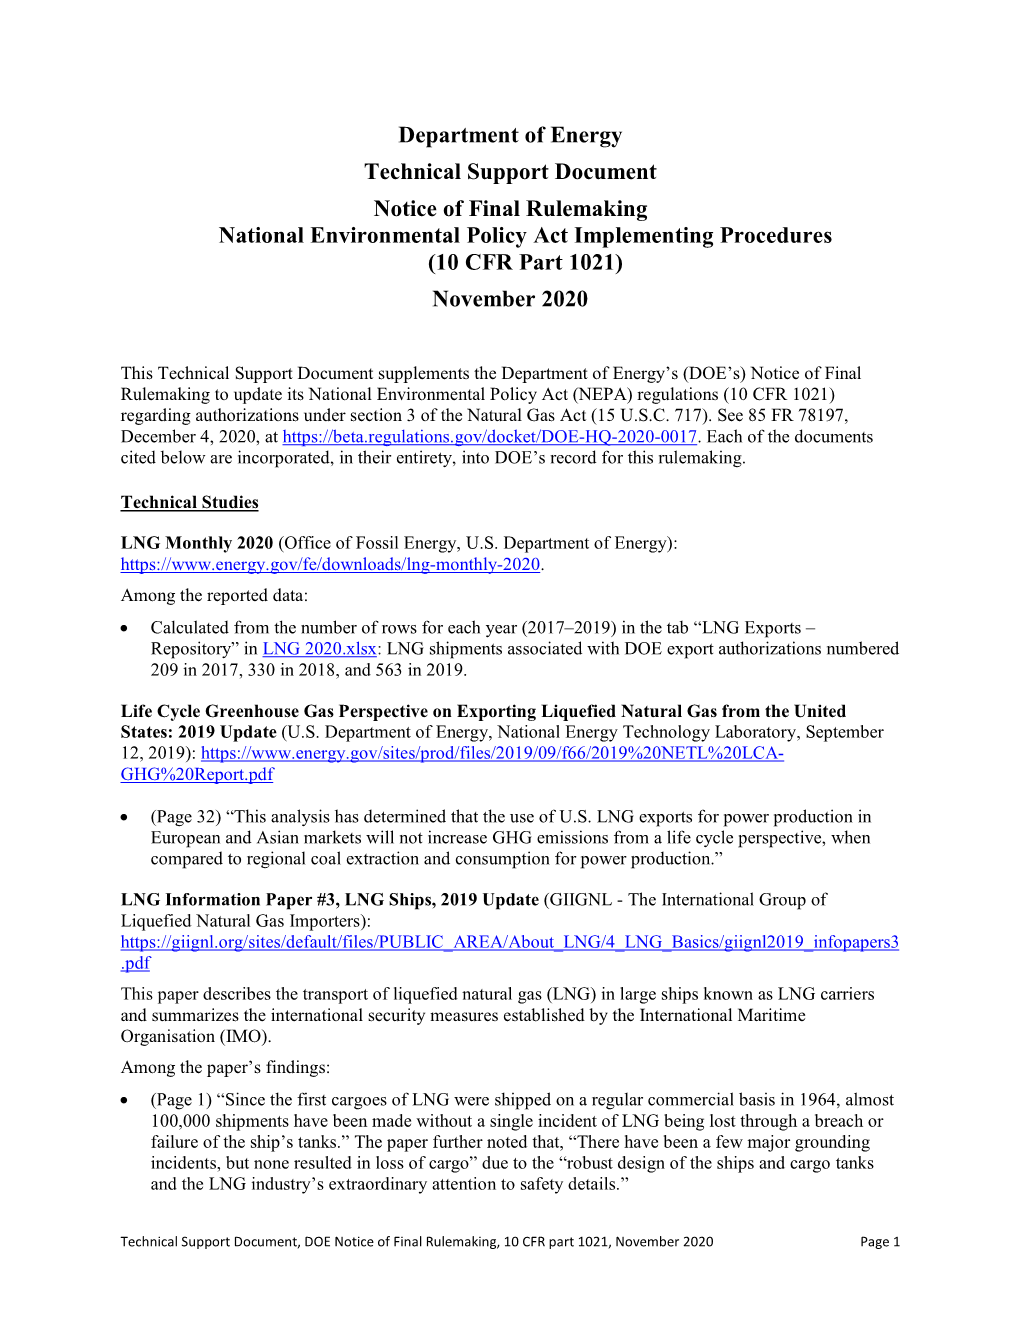 DOE Technical Support Document